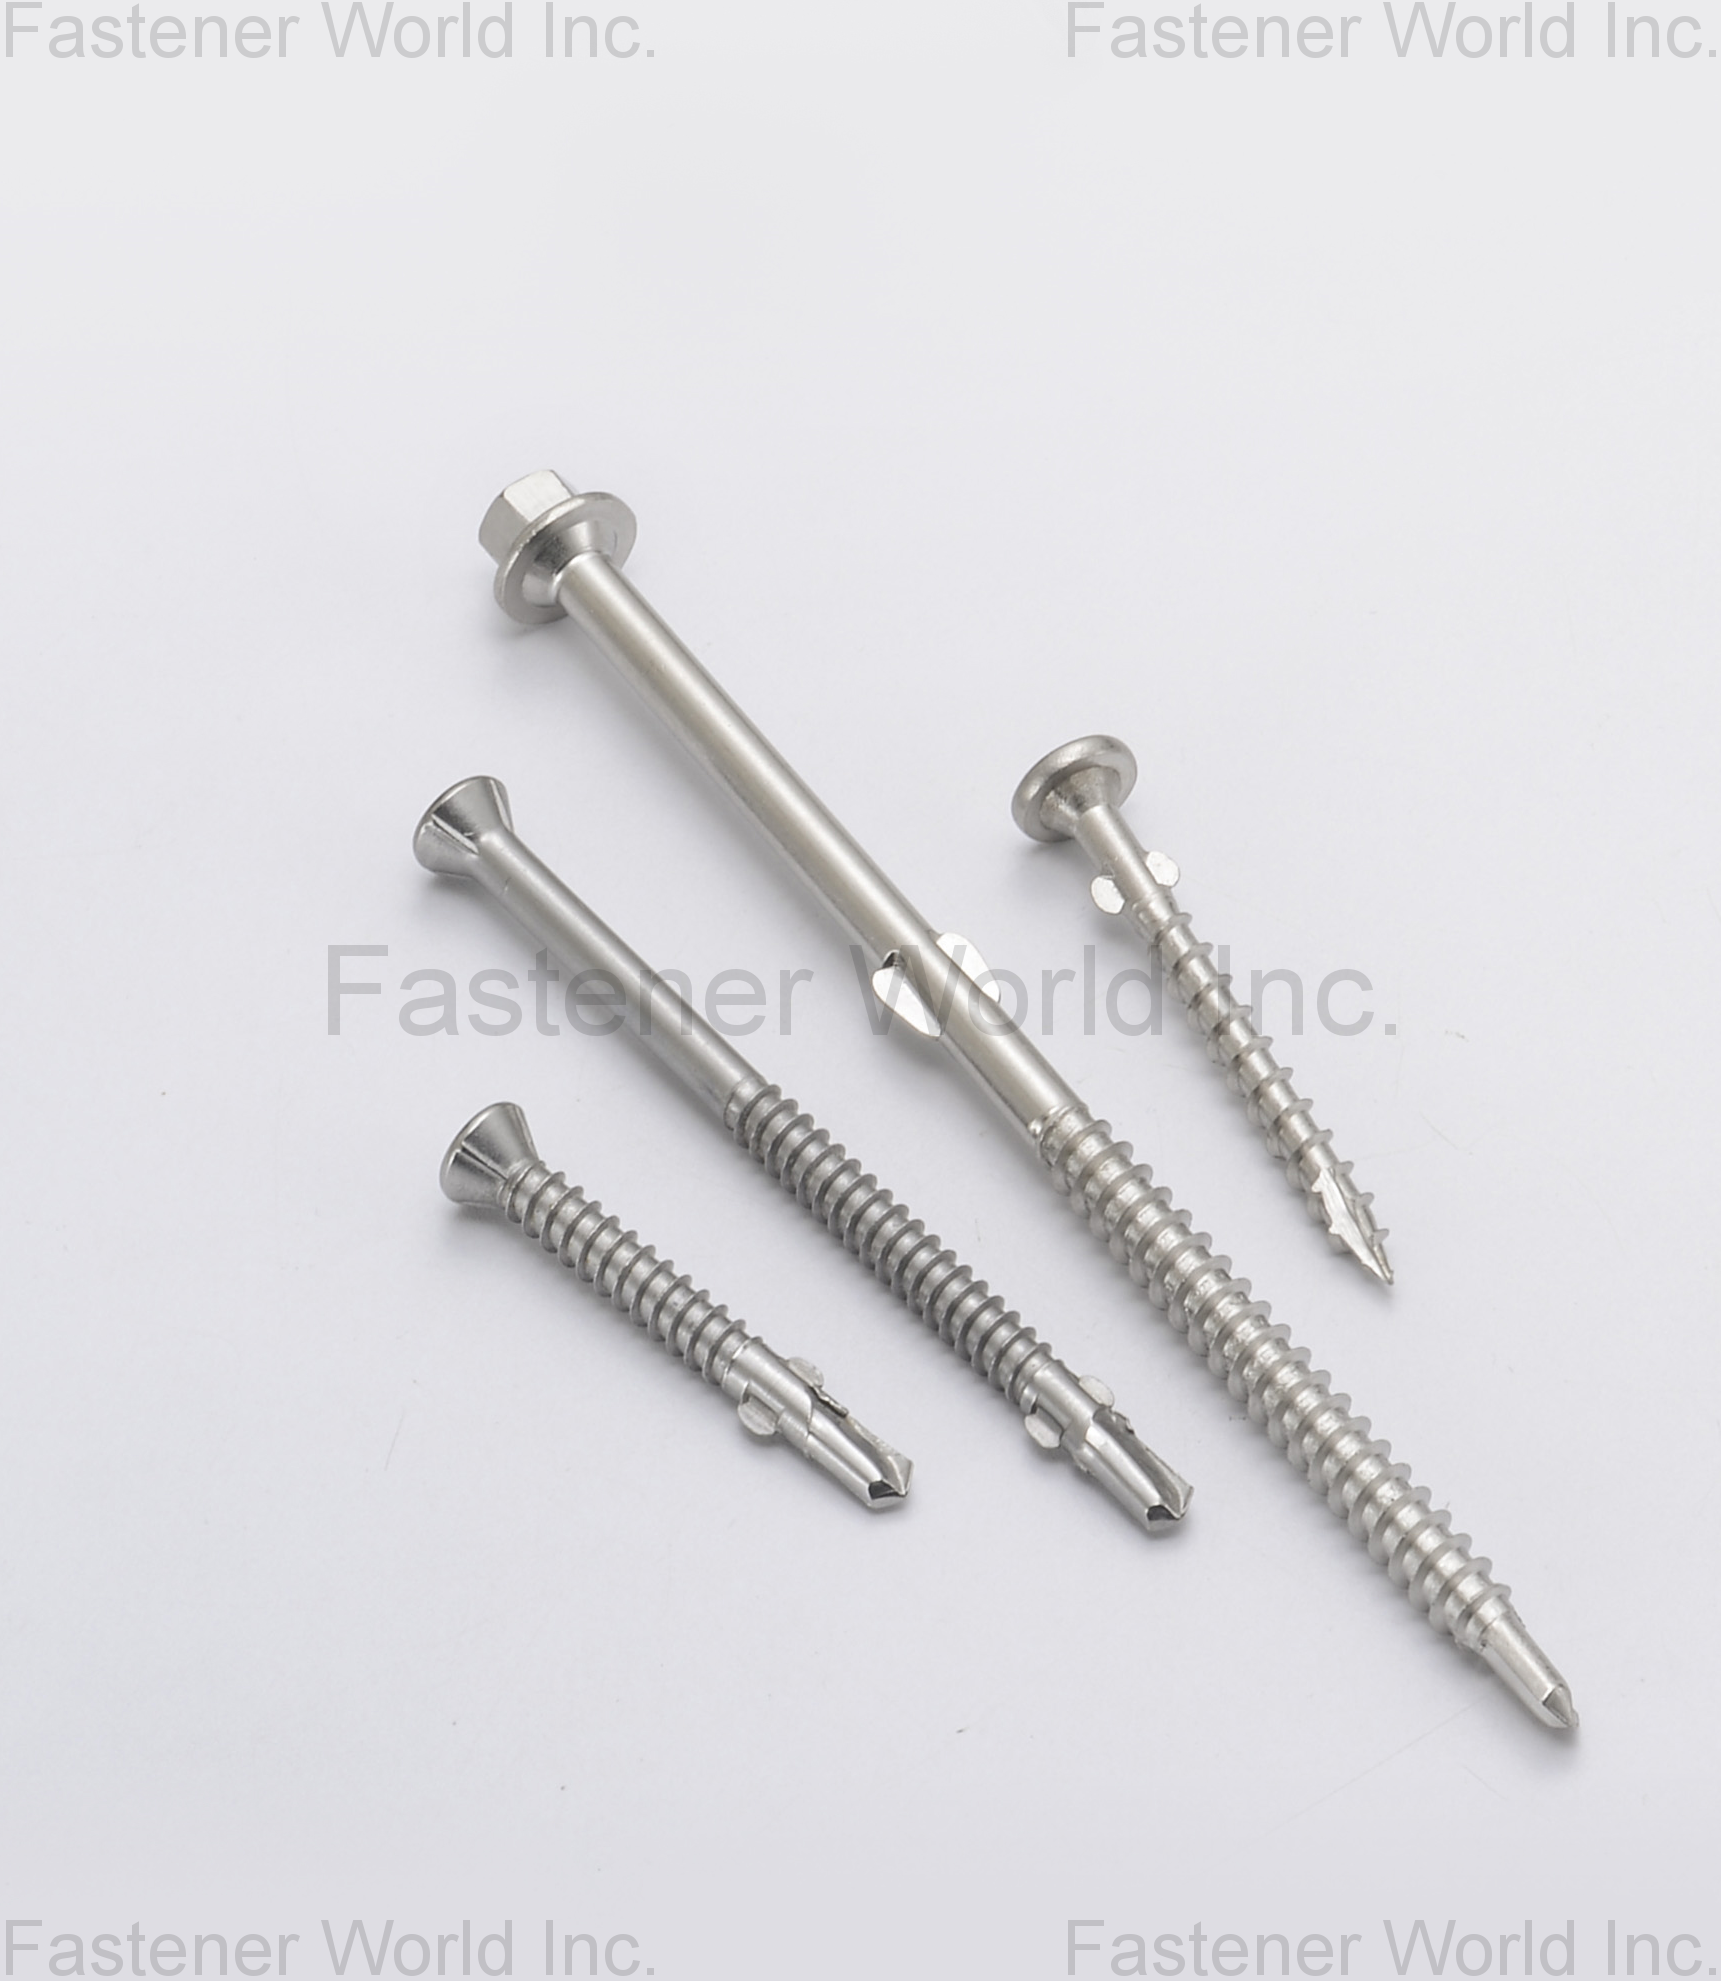 A-PLUS SCREWS INC. , SELF-DRILLING SCREWS WITH WING